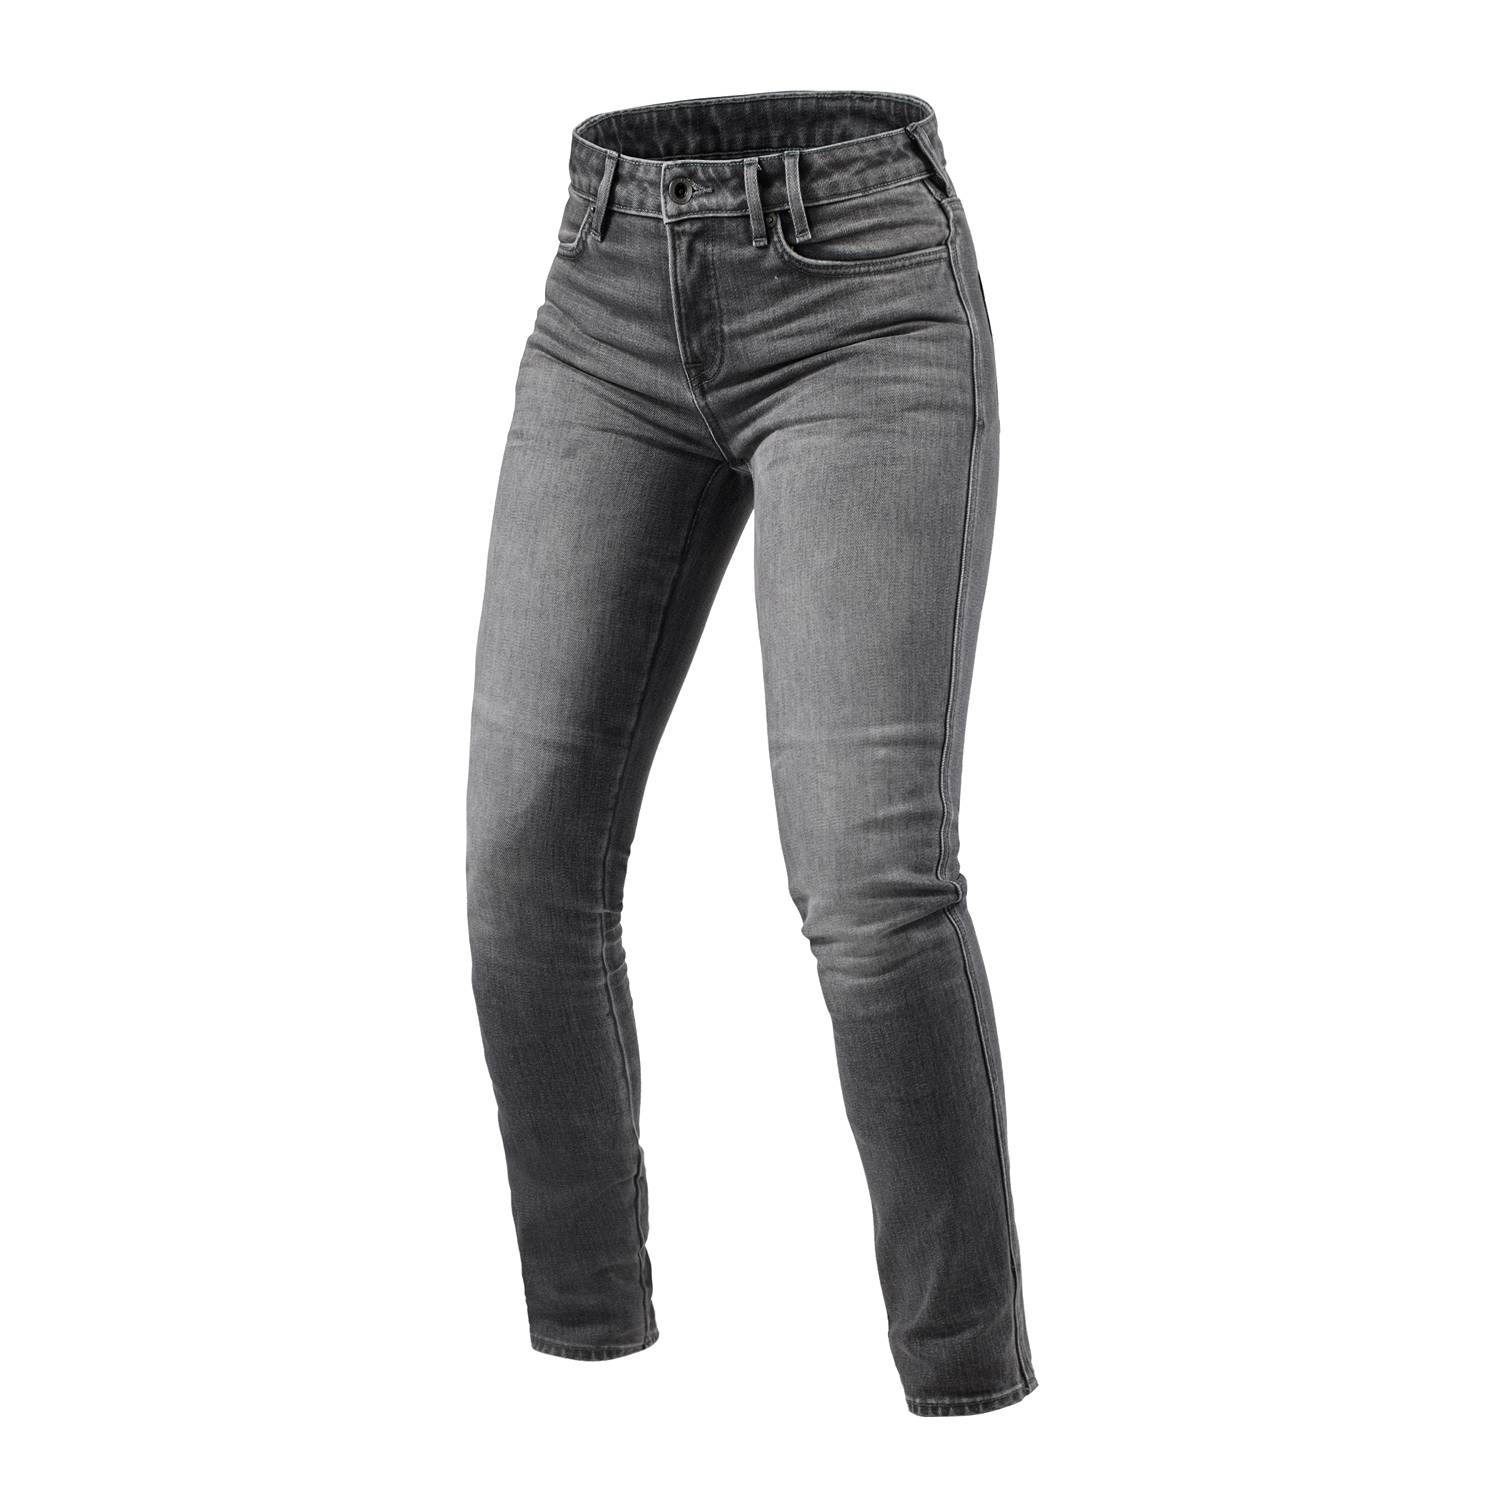 Image of EU REV'IT! Jeans Shelby 2 Ladies SK Medium Grey Stone L32 Taille L32/W27